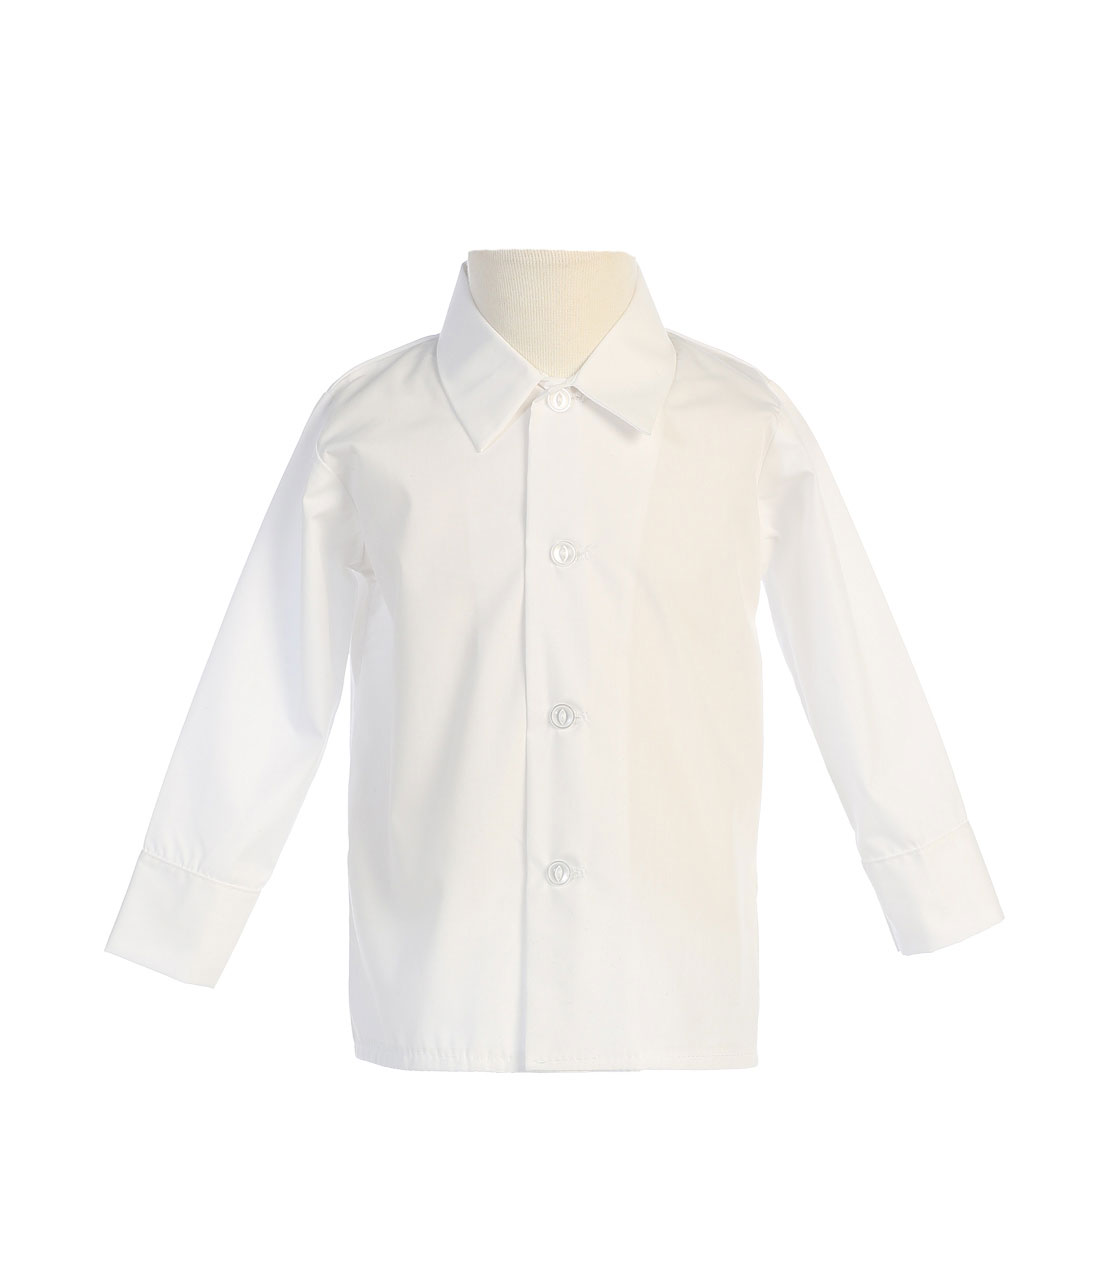 Boys Long Sleeved Simple Dress Shirt - Available in White XL